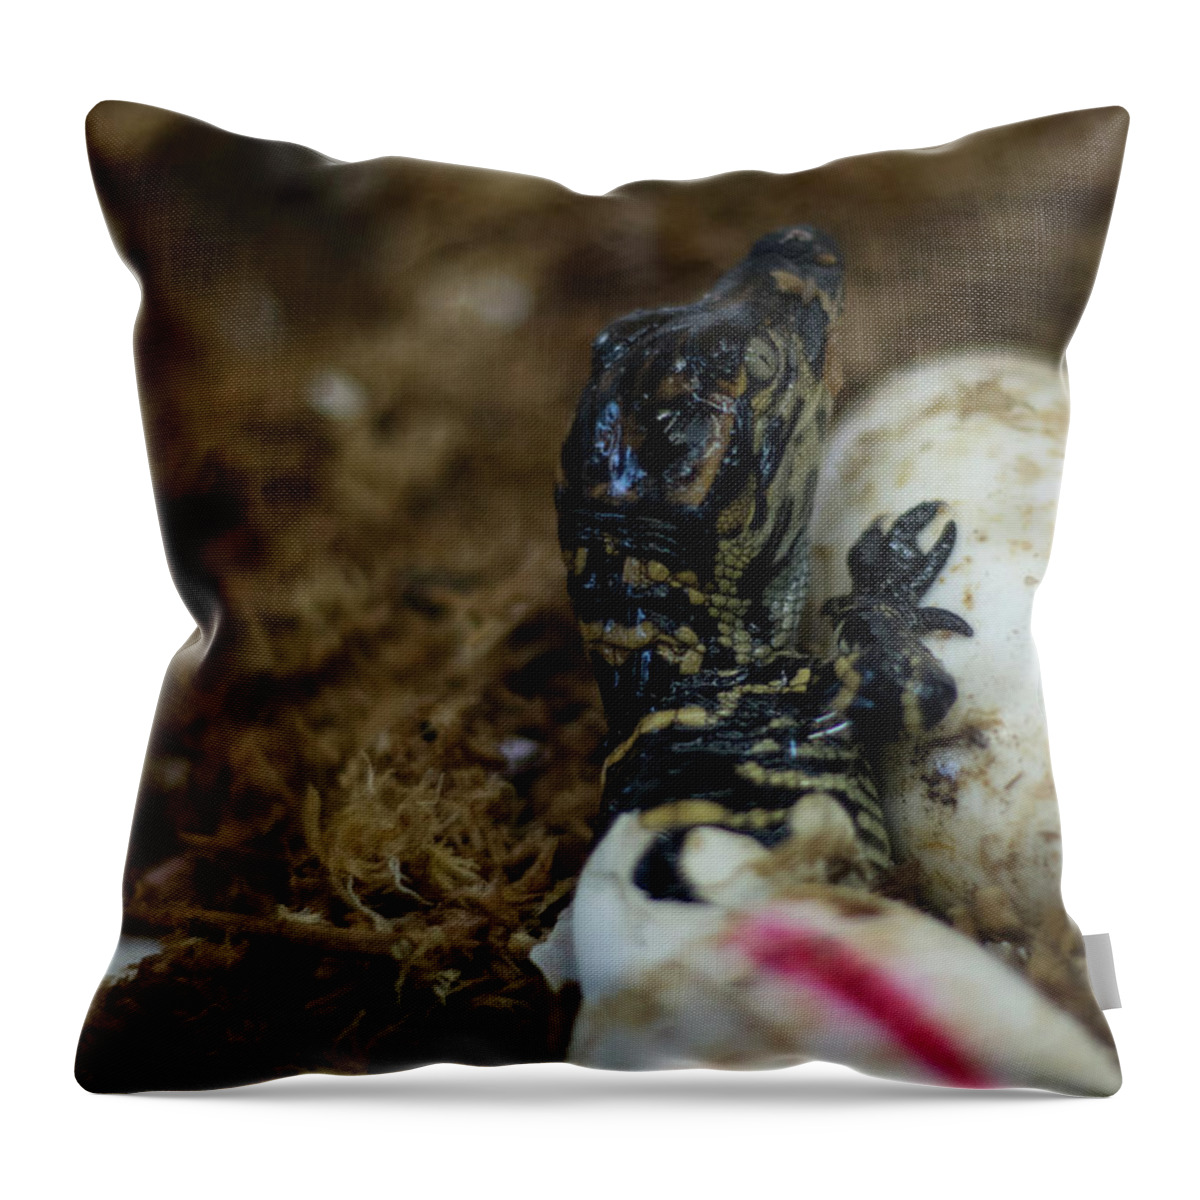 Alligator Throw Pillow featuring the photograph Hatchling Alligator by Carolyn Hutchins